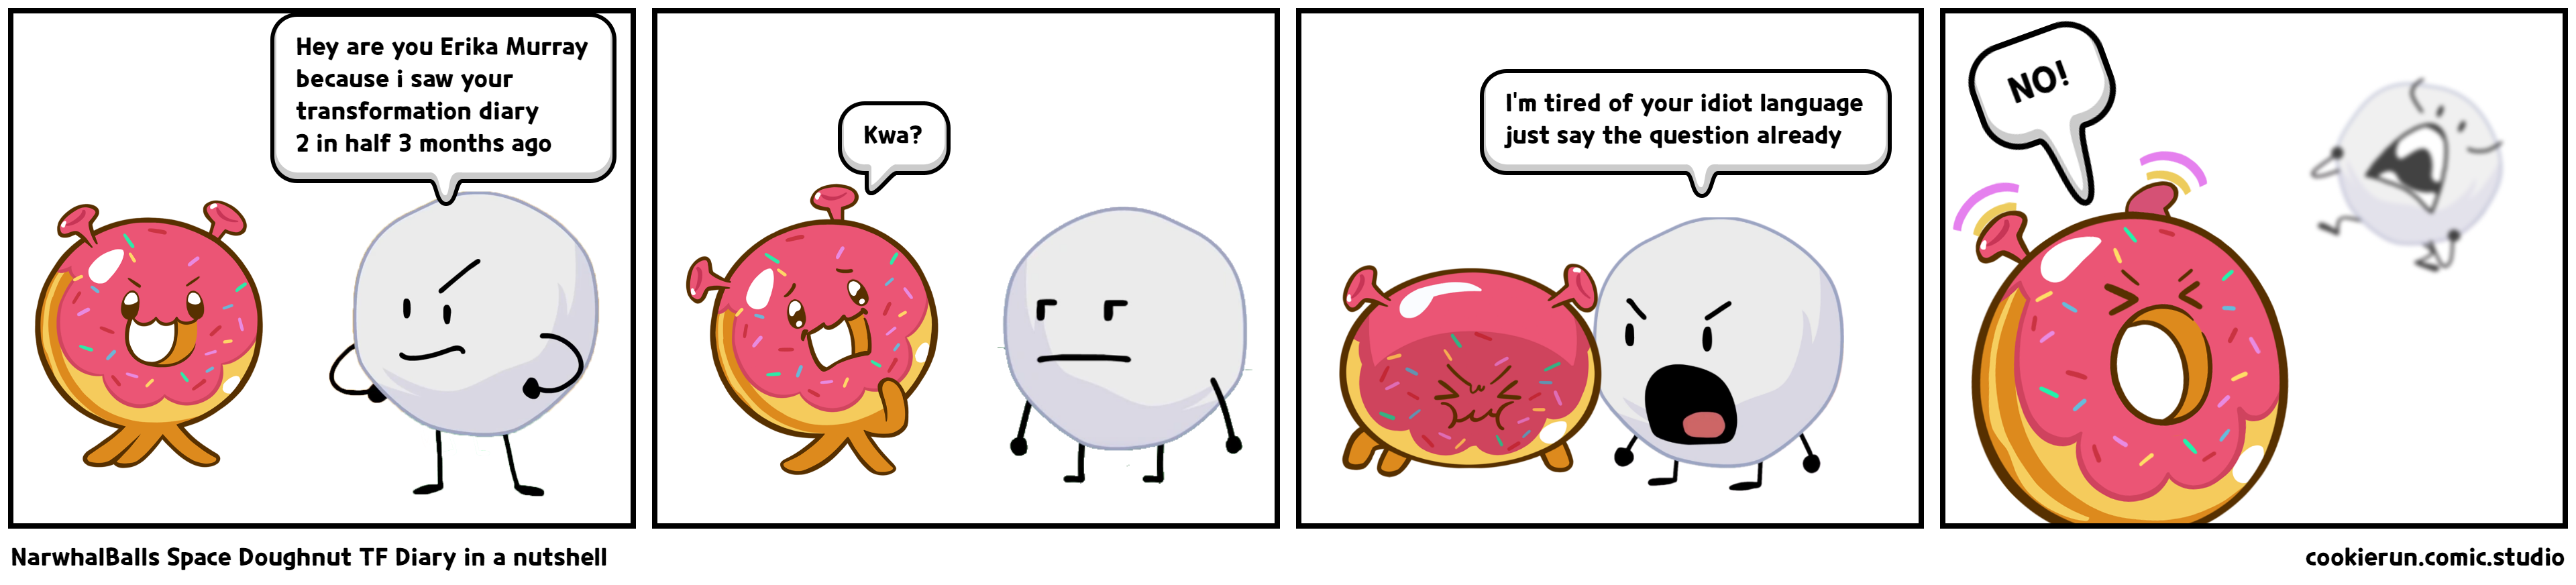 NarwhalBalls Space Doughnut TF Diary in a nutshell